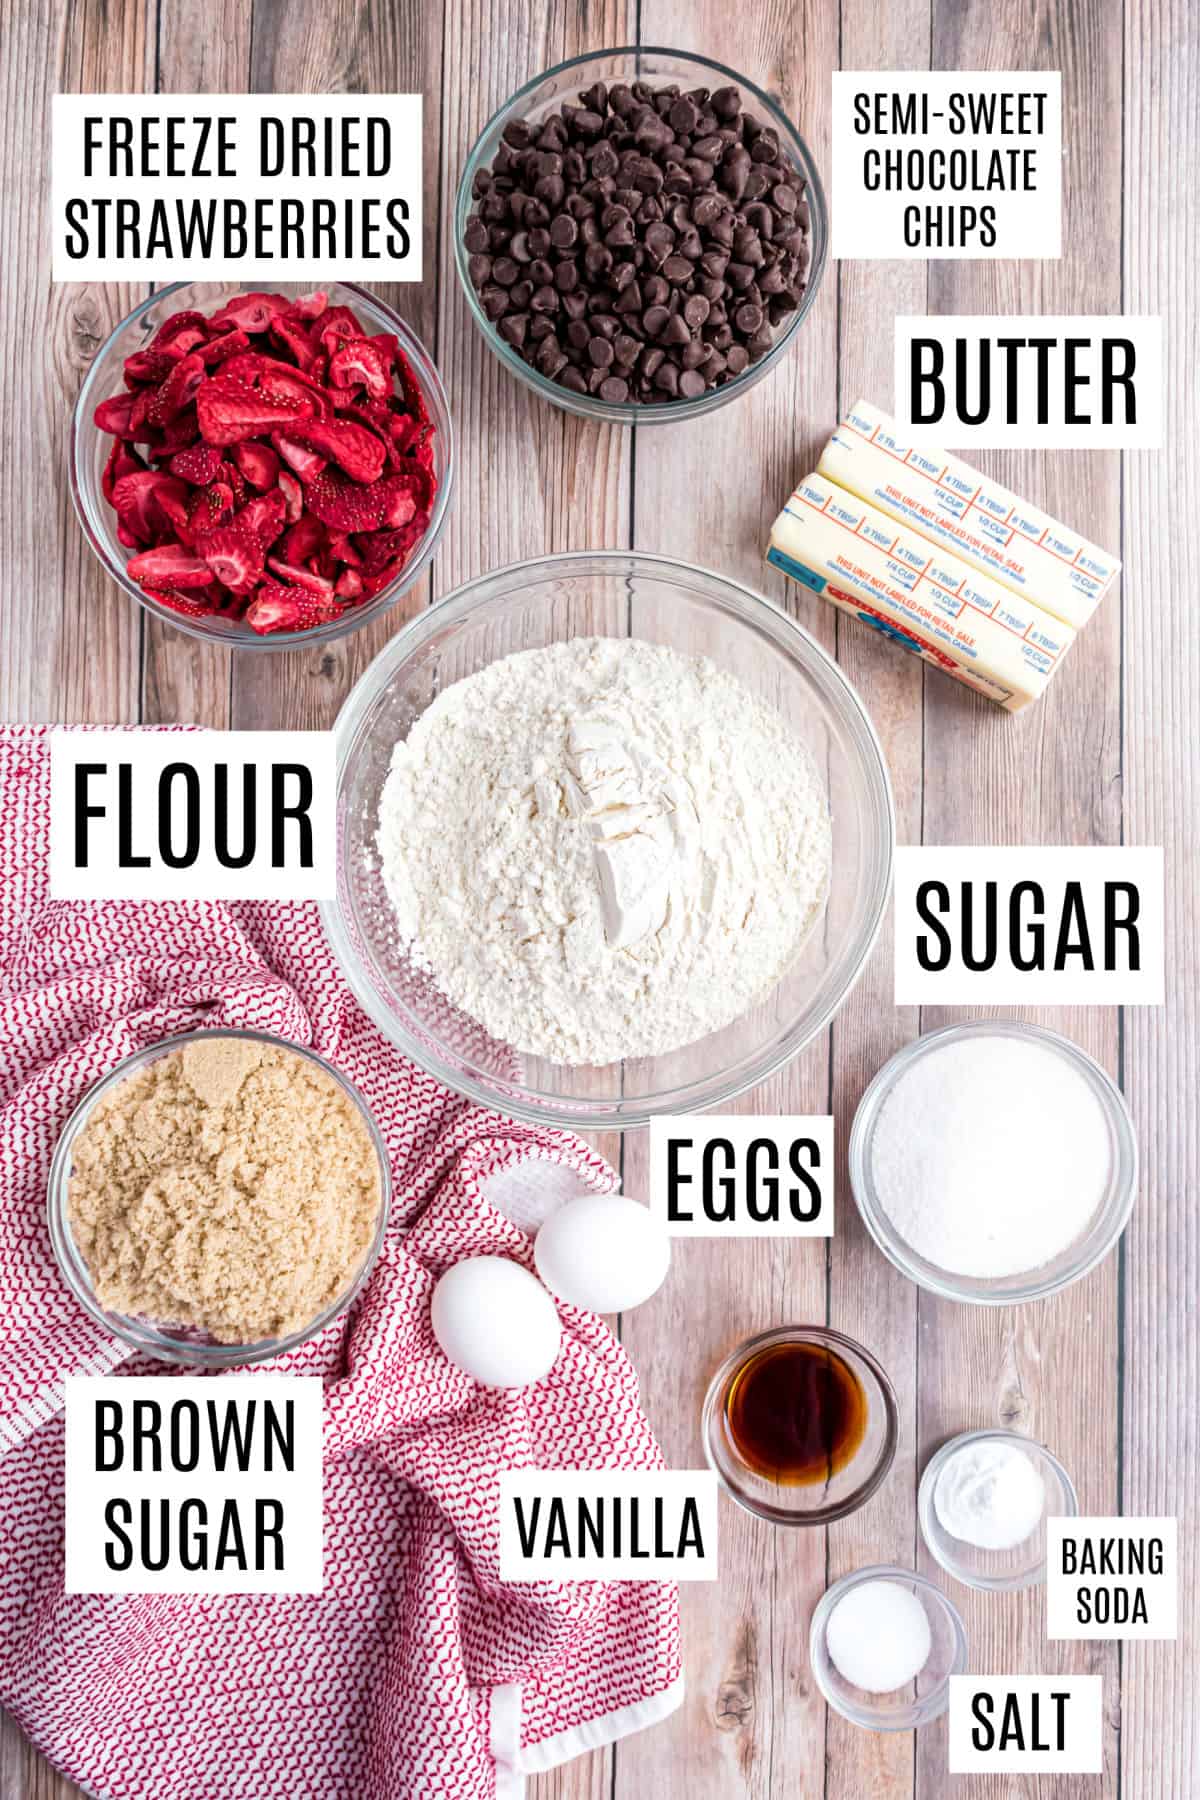 Ingredients needed to make chocolate chip cookies with strawberries.